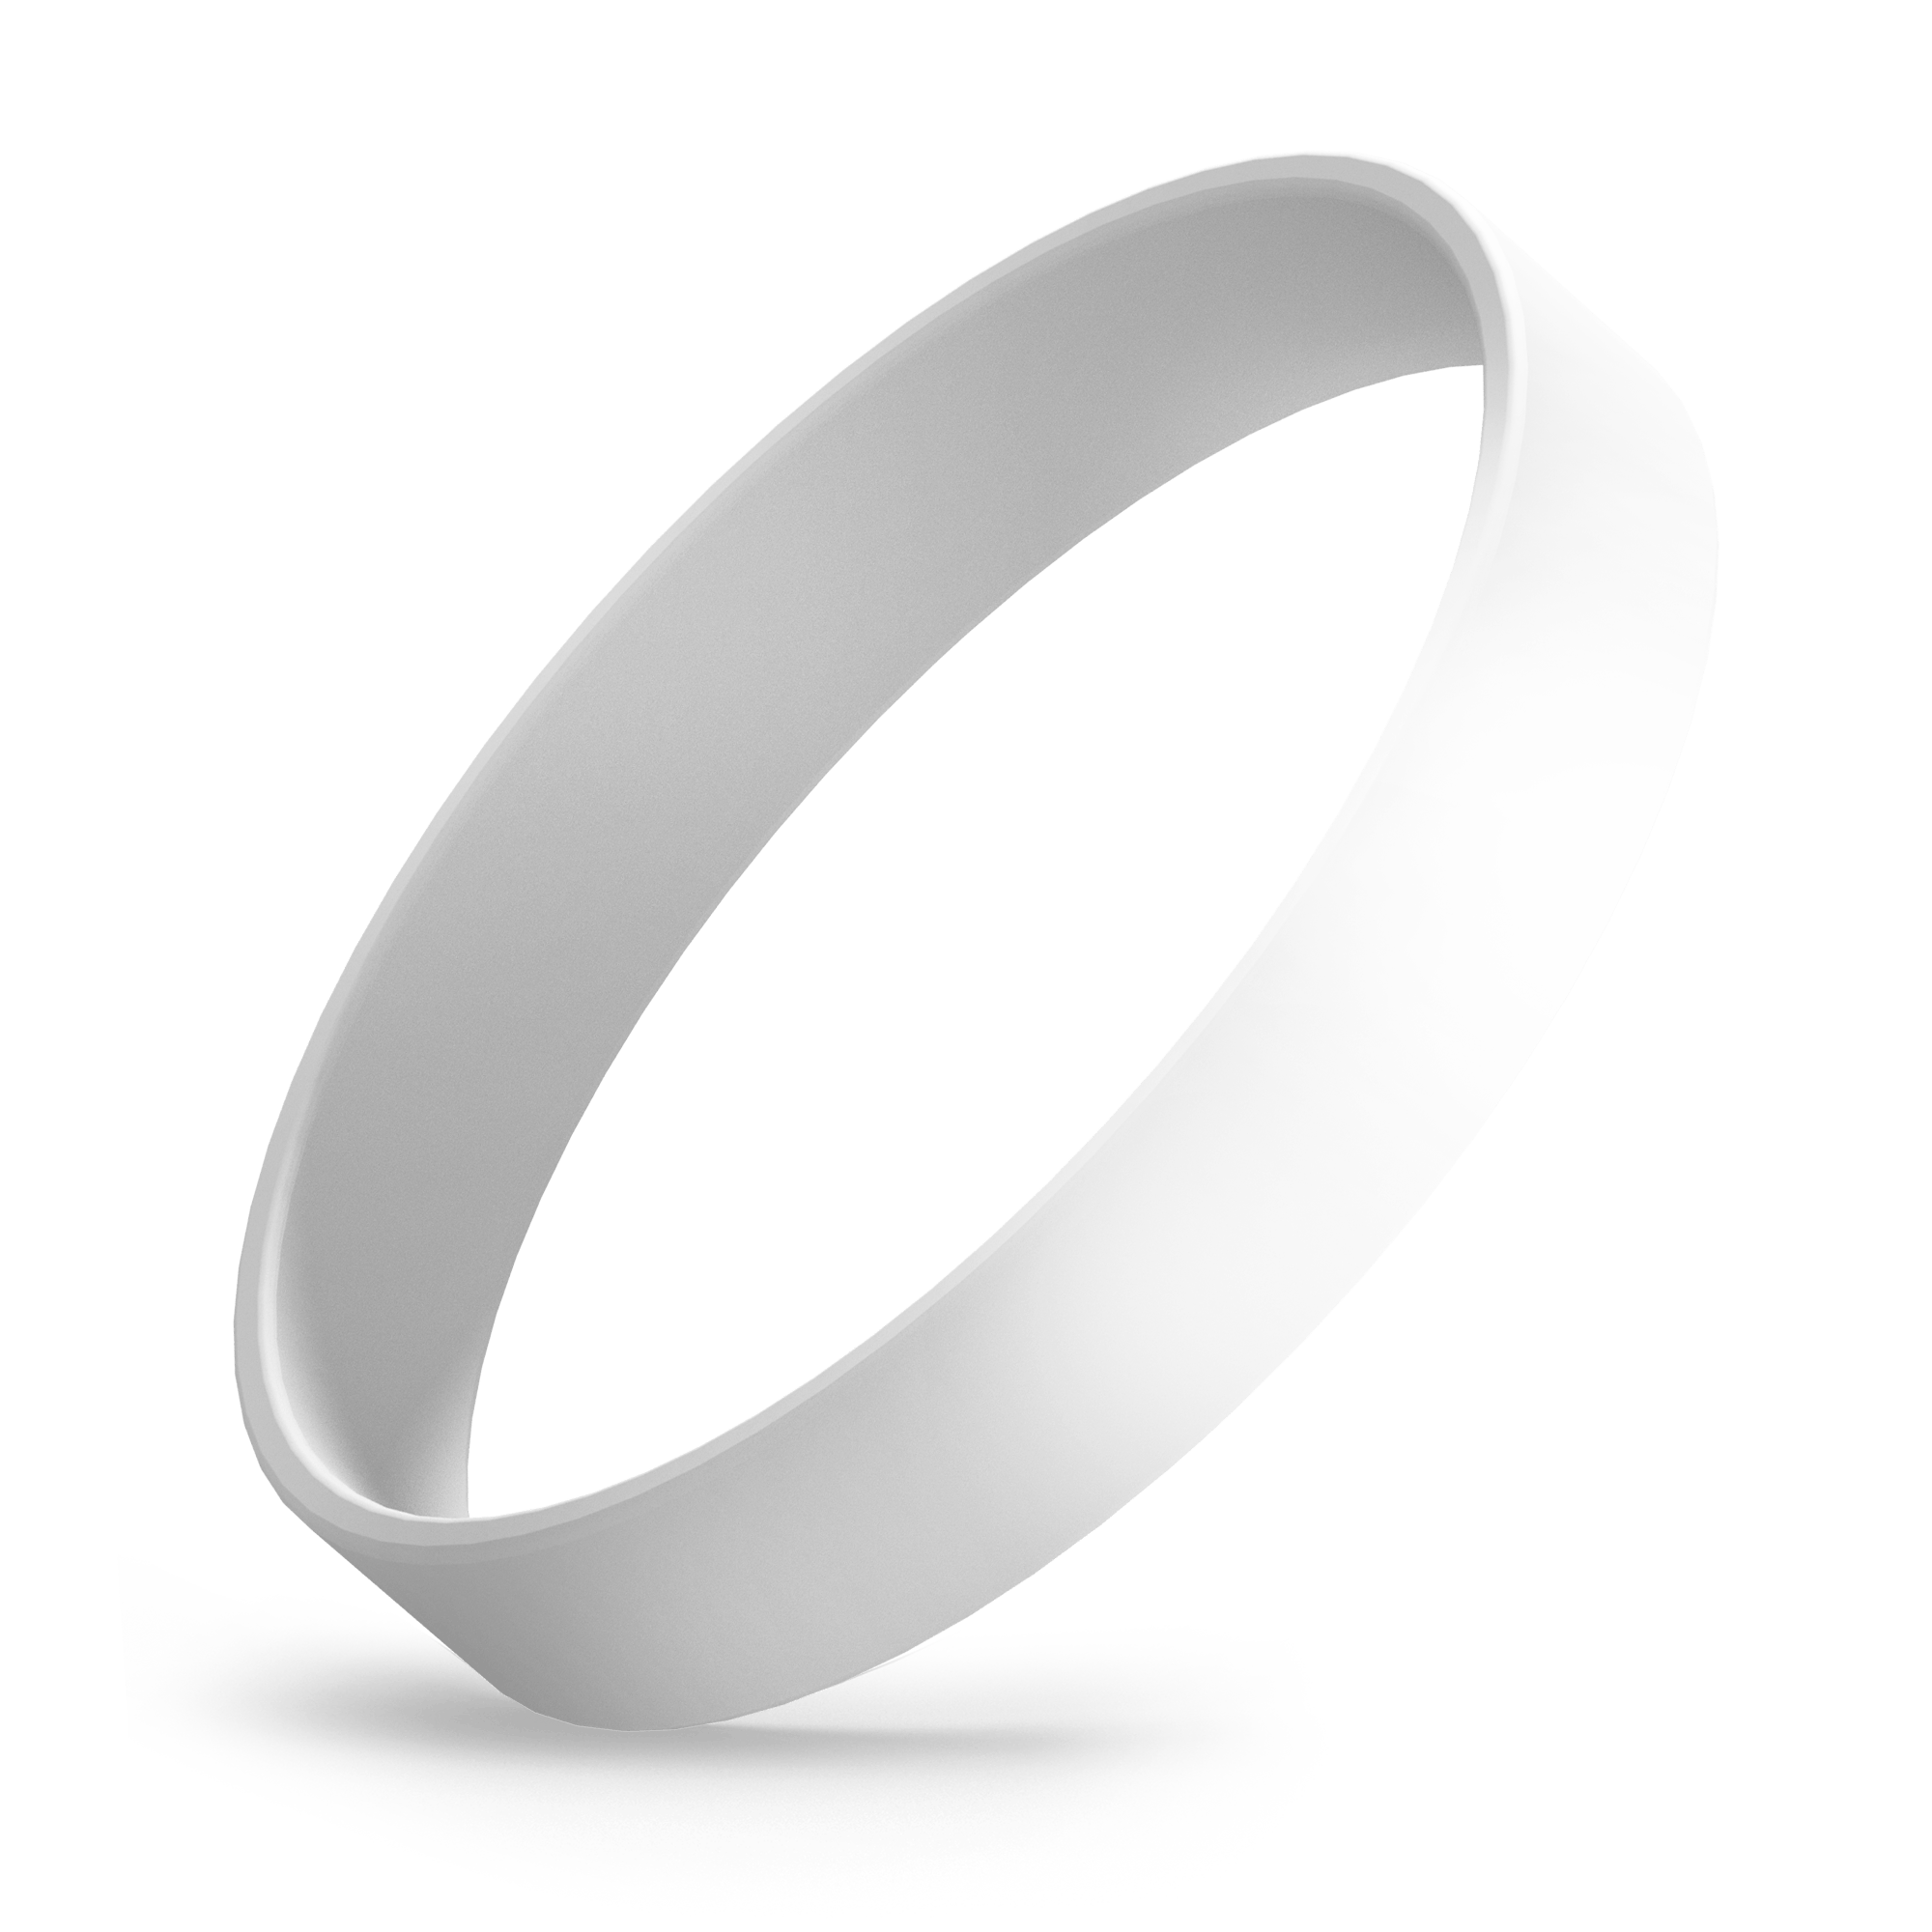 Custom Printed (White) Silicone Wristbands - Rubber Bracelets by Wristband Resources